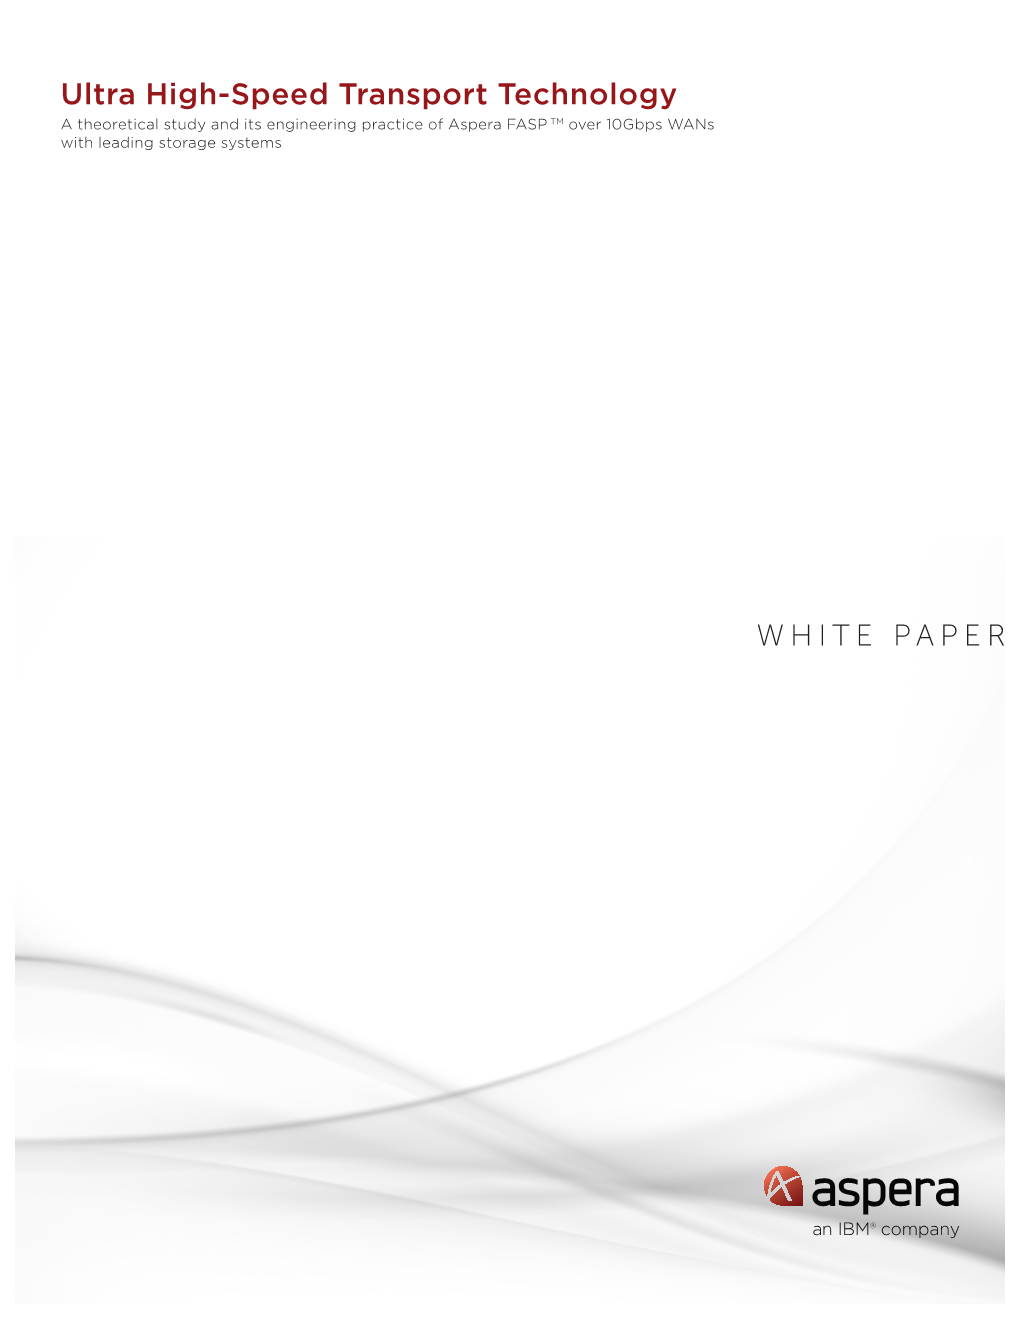 Ultra High-Speed Transport Technology WHITE PAPER